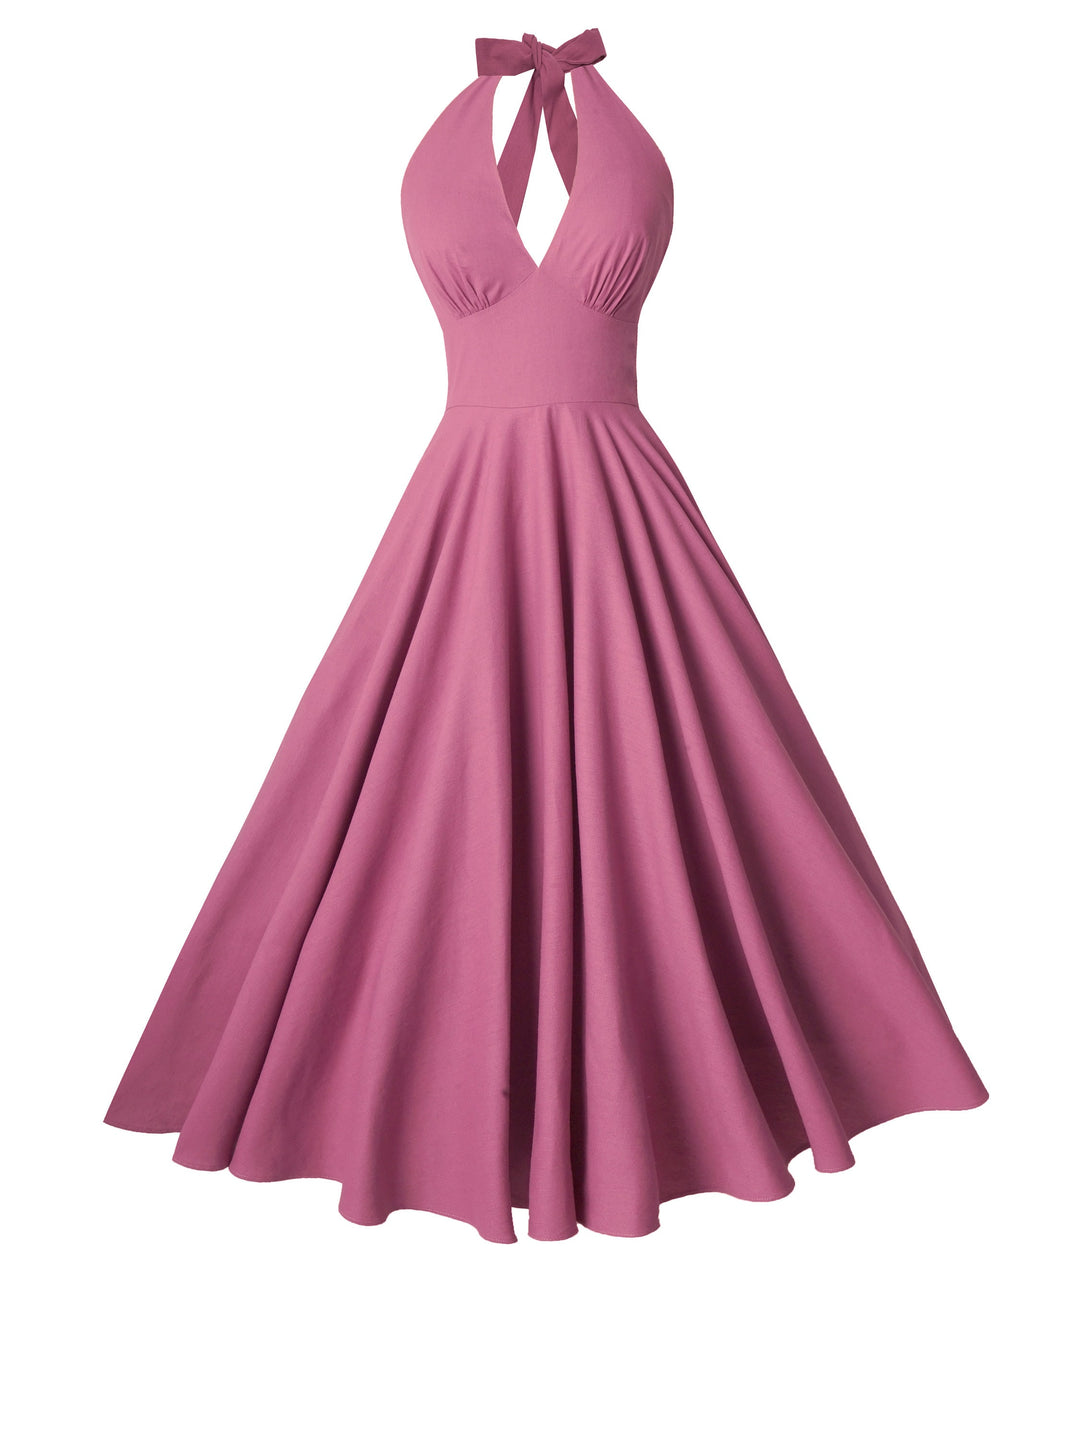 RTS - Size XS - Mansfield Dress in Mauve Rose Linen